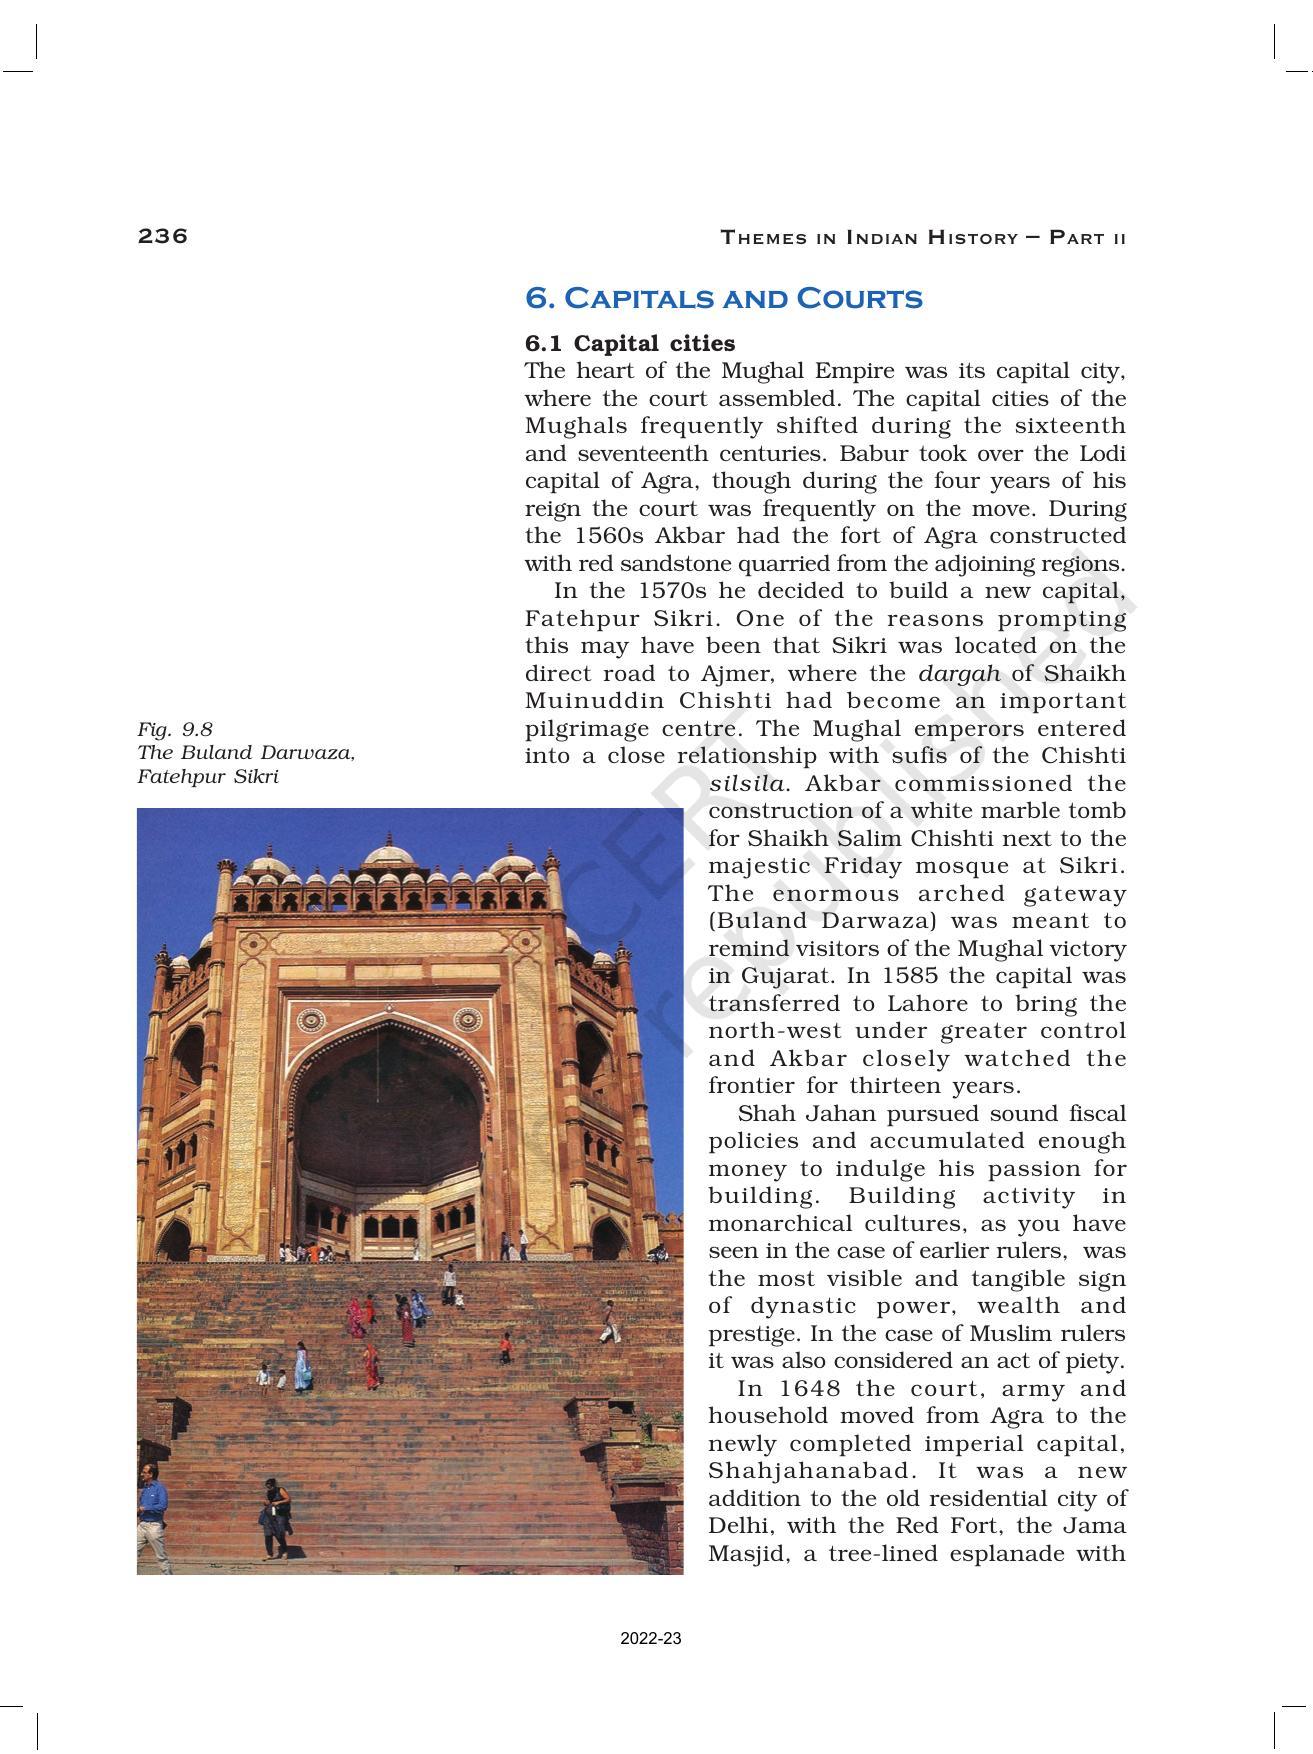 NCERT Book for Class 12 History (Part-II) Chapter 9 Kings and Chronicles - Page 13